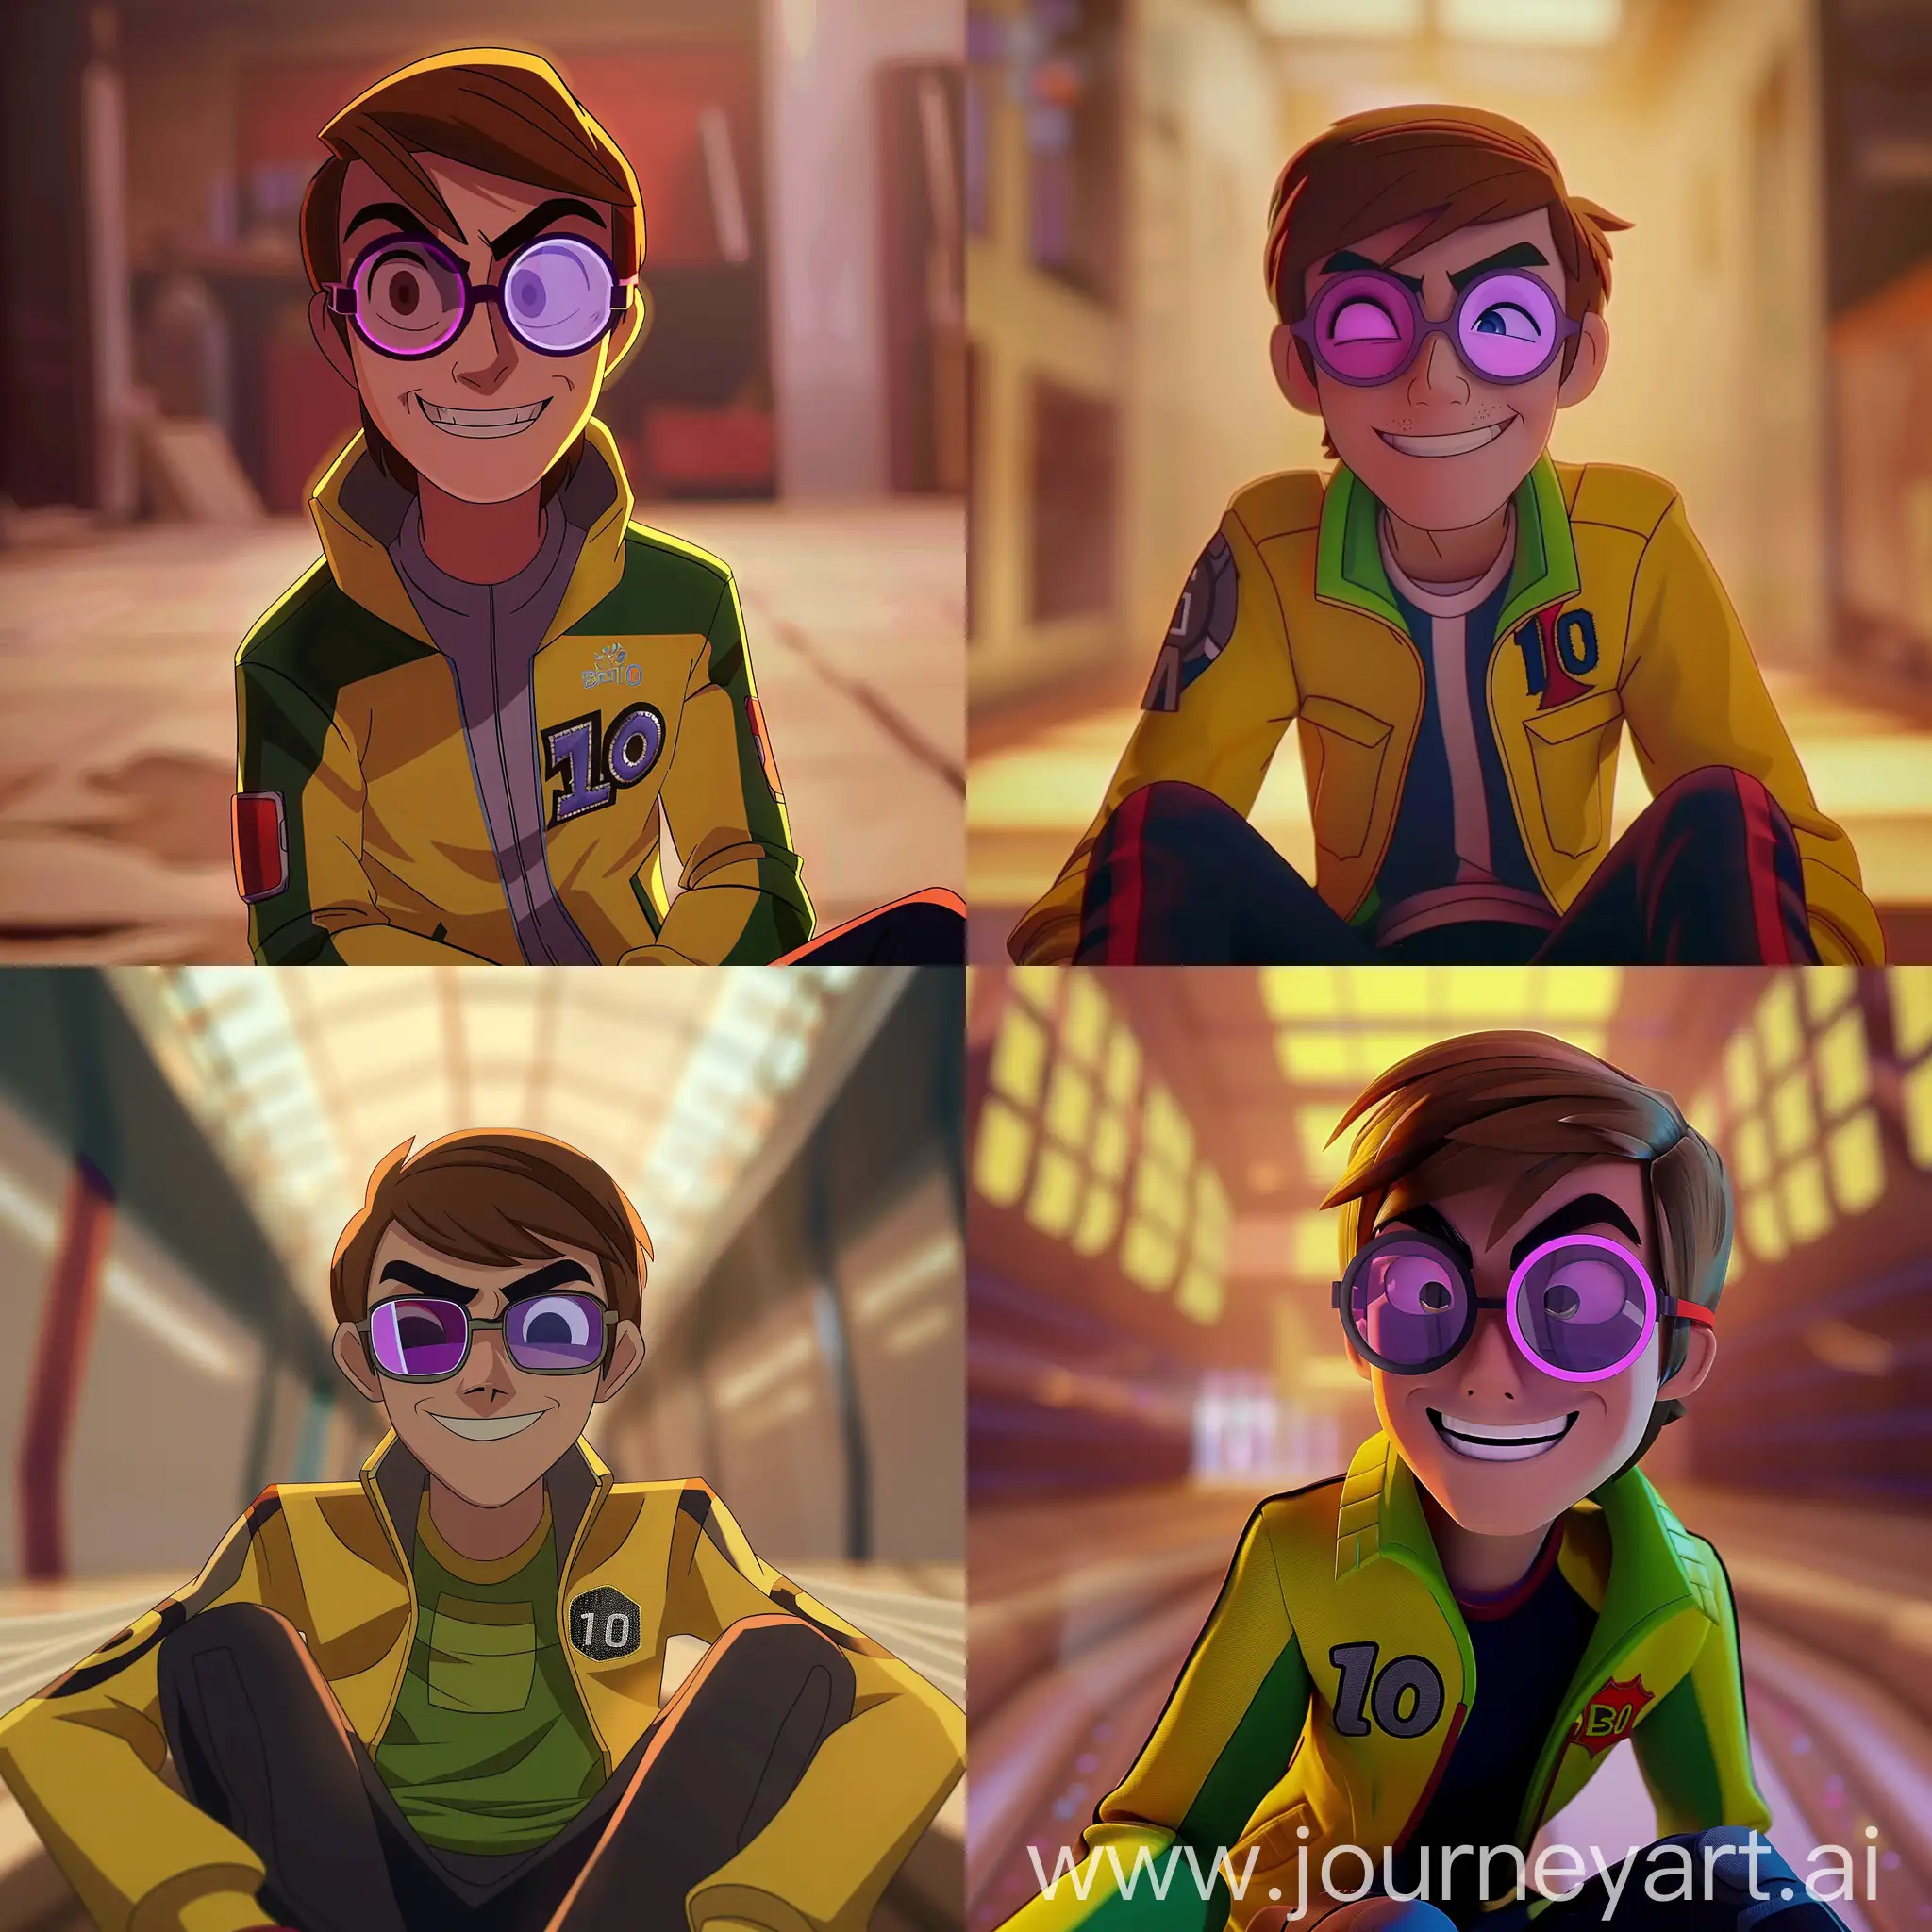 a cartoon network animated character wearing glasses with one lense of color purple and other lense of color grey, straight angle shot with him smiling and "ben 10" is embroidered on his yellow jacket, he's sitting on the empty hollow space with blur aesthetic background --style raw --cref https://cdn.discordapp.com/attachments/1215979386310889605/1216982884083040266/Picsart_24-03-08_22-57-05-471.jpg?ex=66025ea2&is=65efe9a2&hm=a3c3cd11df6f7a445bf1bb038220edc722e23bafed0277ddb6c2189fdd7132ea& --cw 10